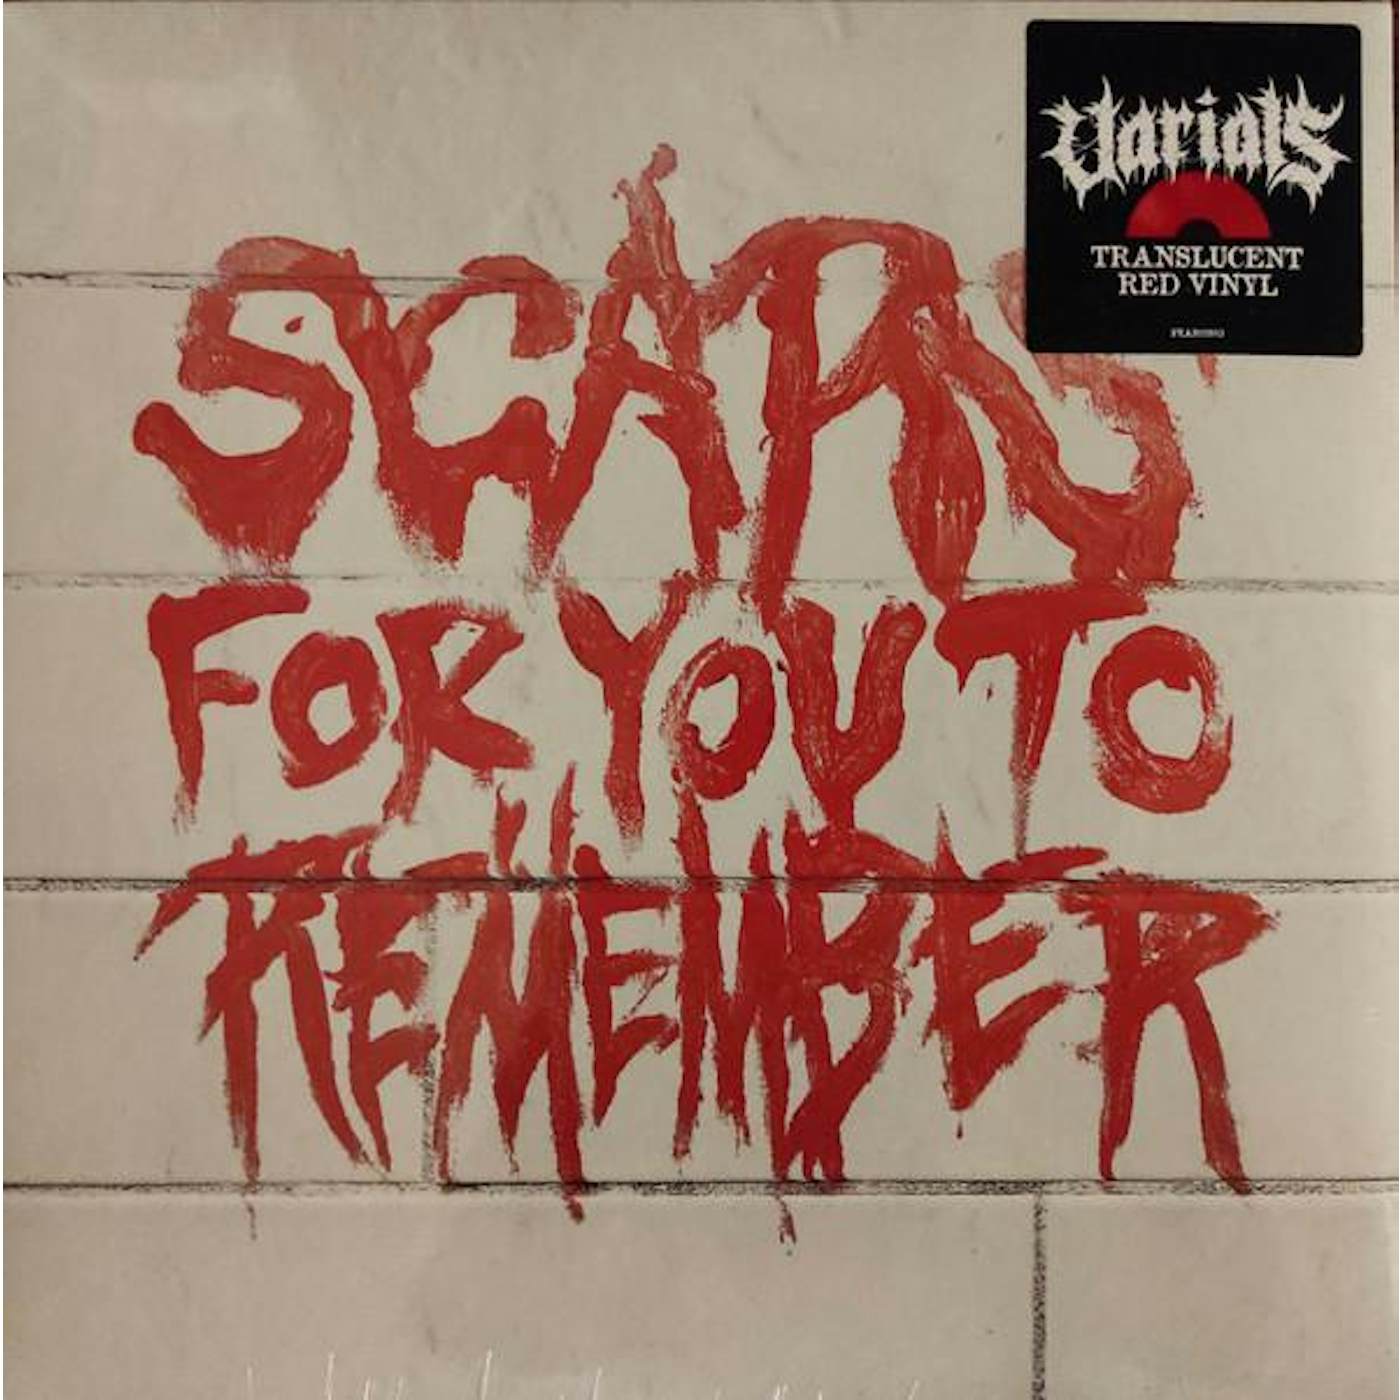 Varials SCARS FOR YOU TO REMEMBER (TRANSLUCENT RED VINYL) Vinyl Record